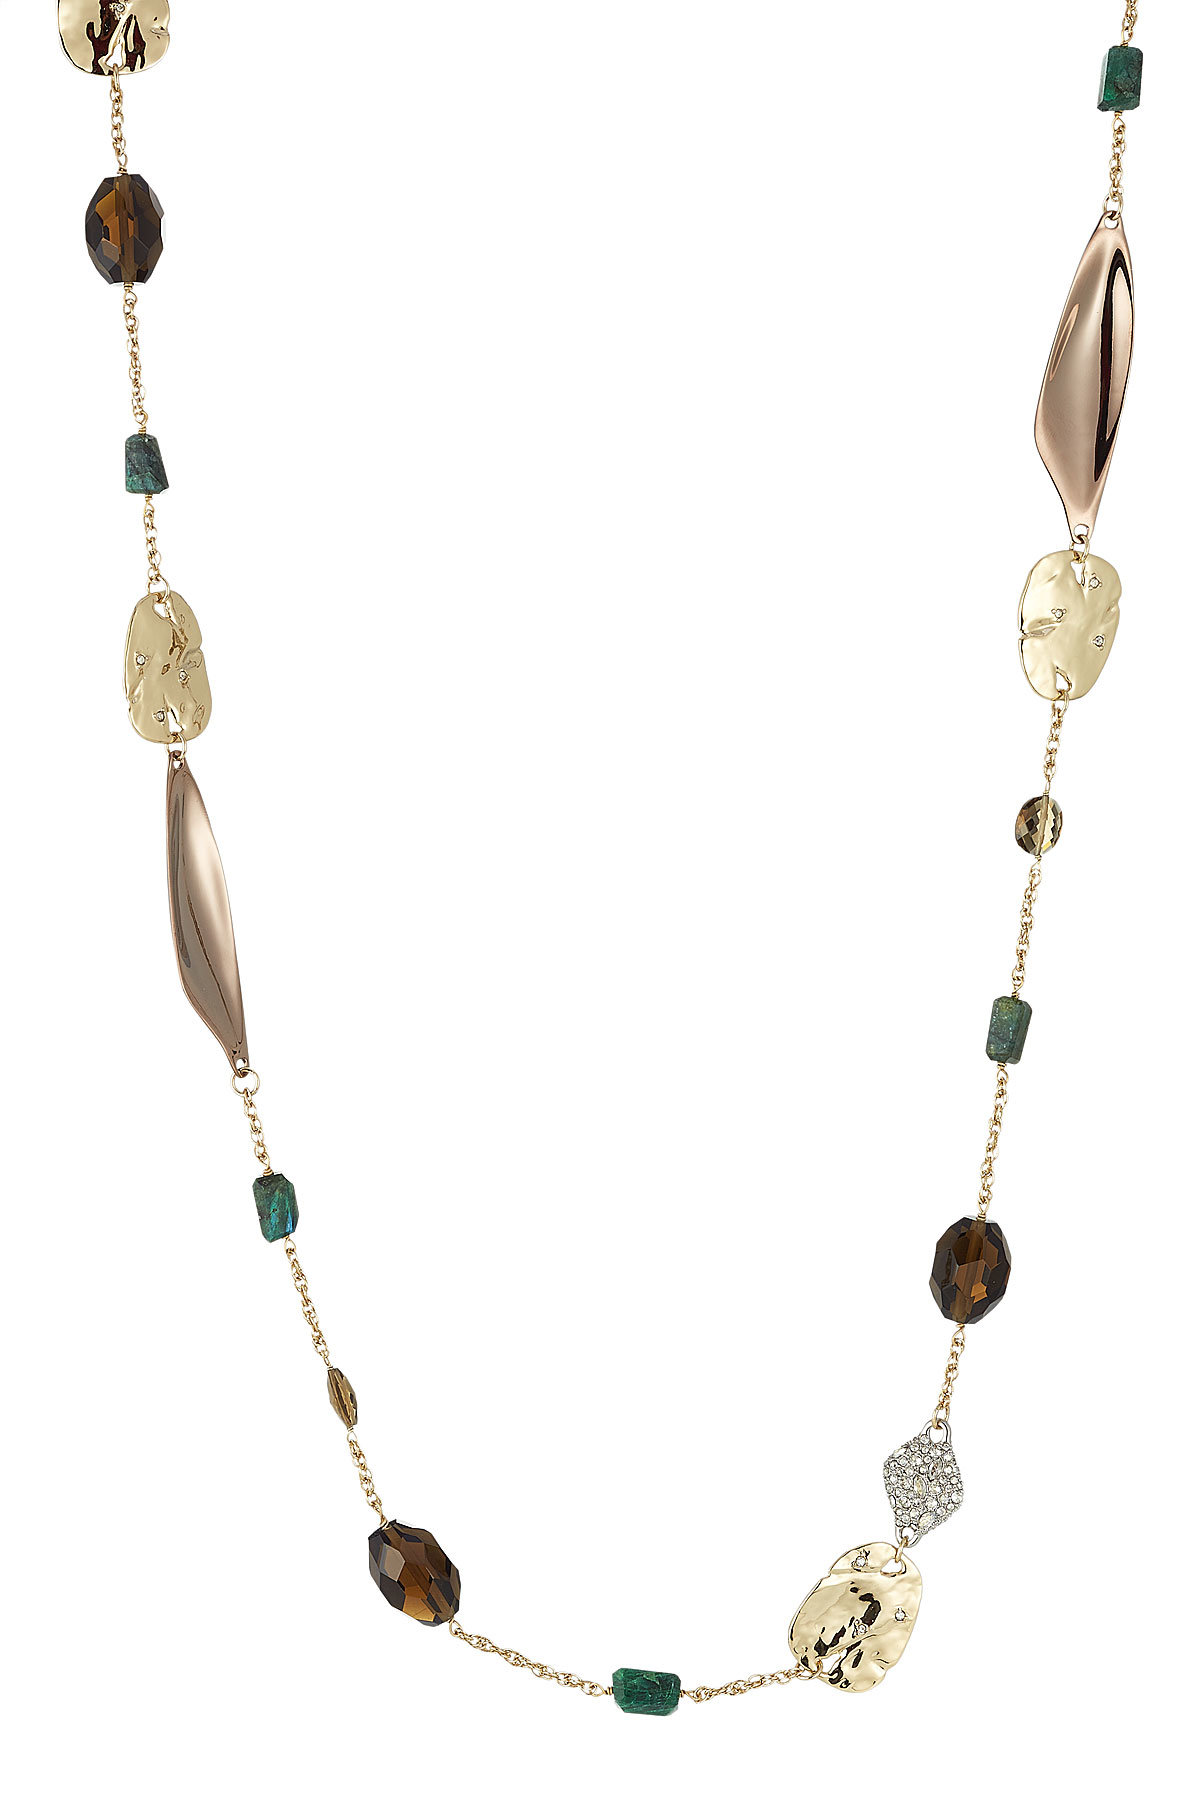 10kt Gold Necklace with Crystals by Alexis Bittar